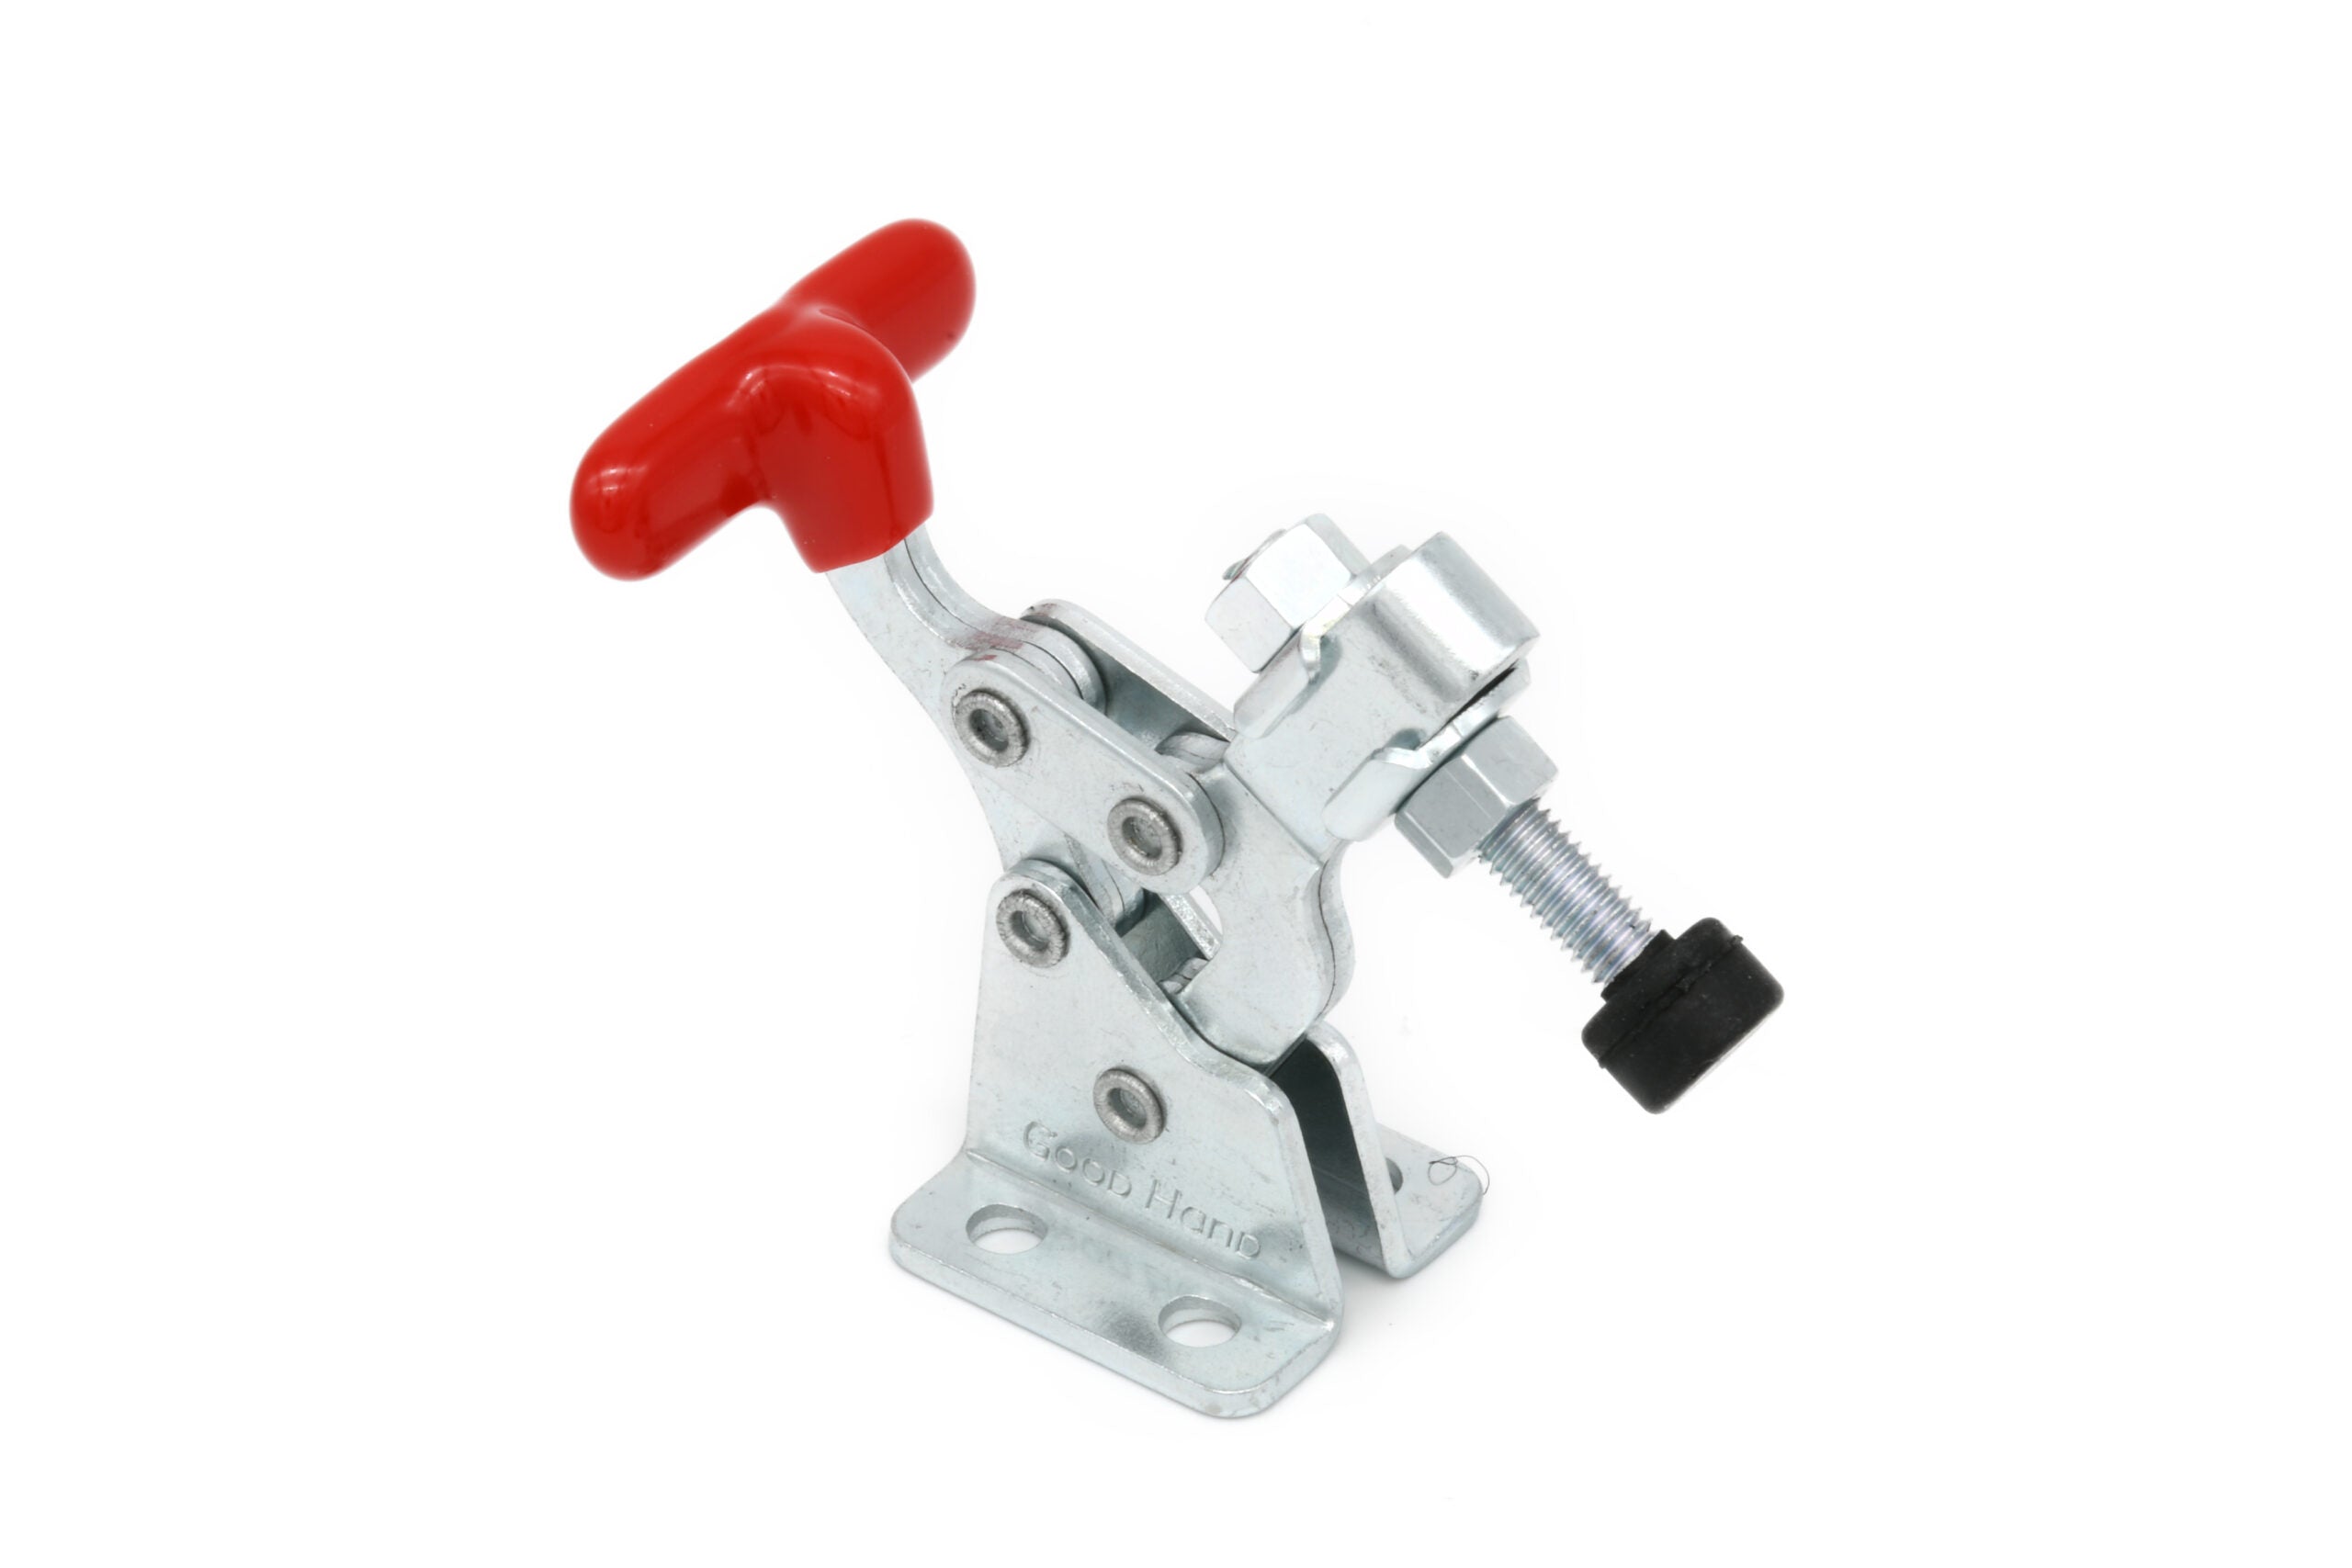 Planet Low Profile Toggle Clamp 68kg